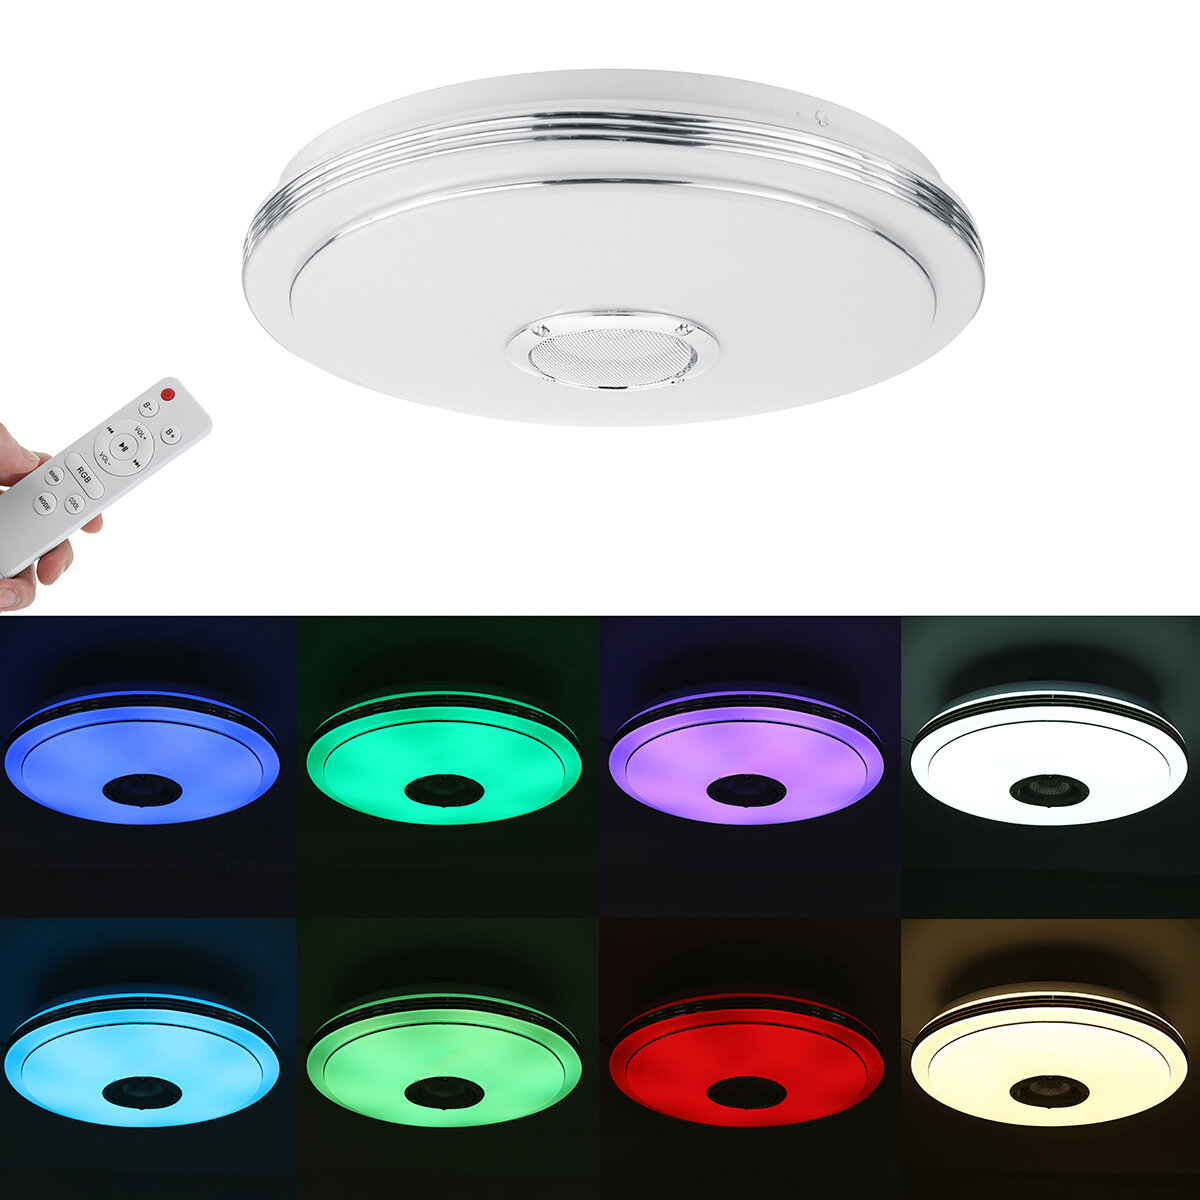 WIFI LED Ceiling Light RGB bluetooth Music Dimmable Lamp APP Remote Control